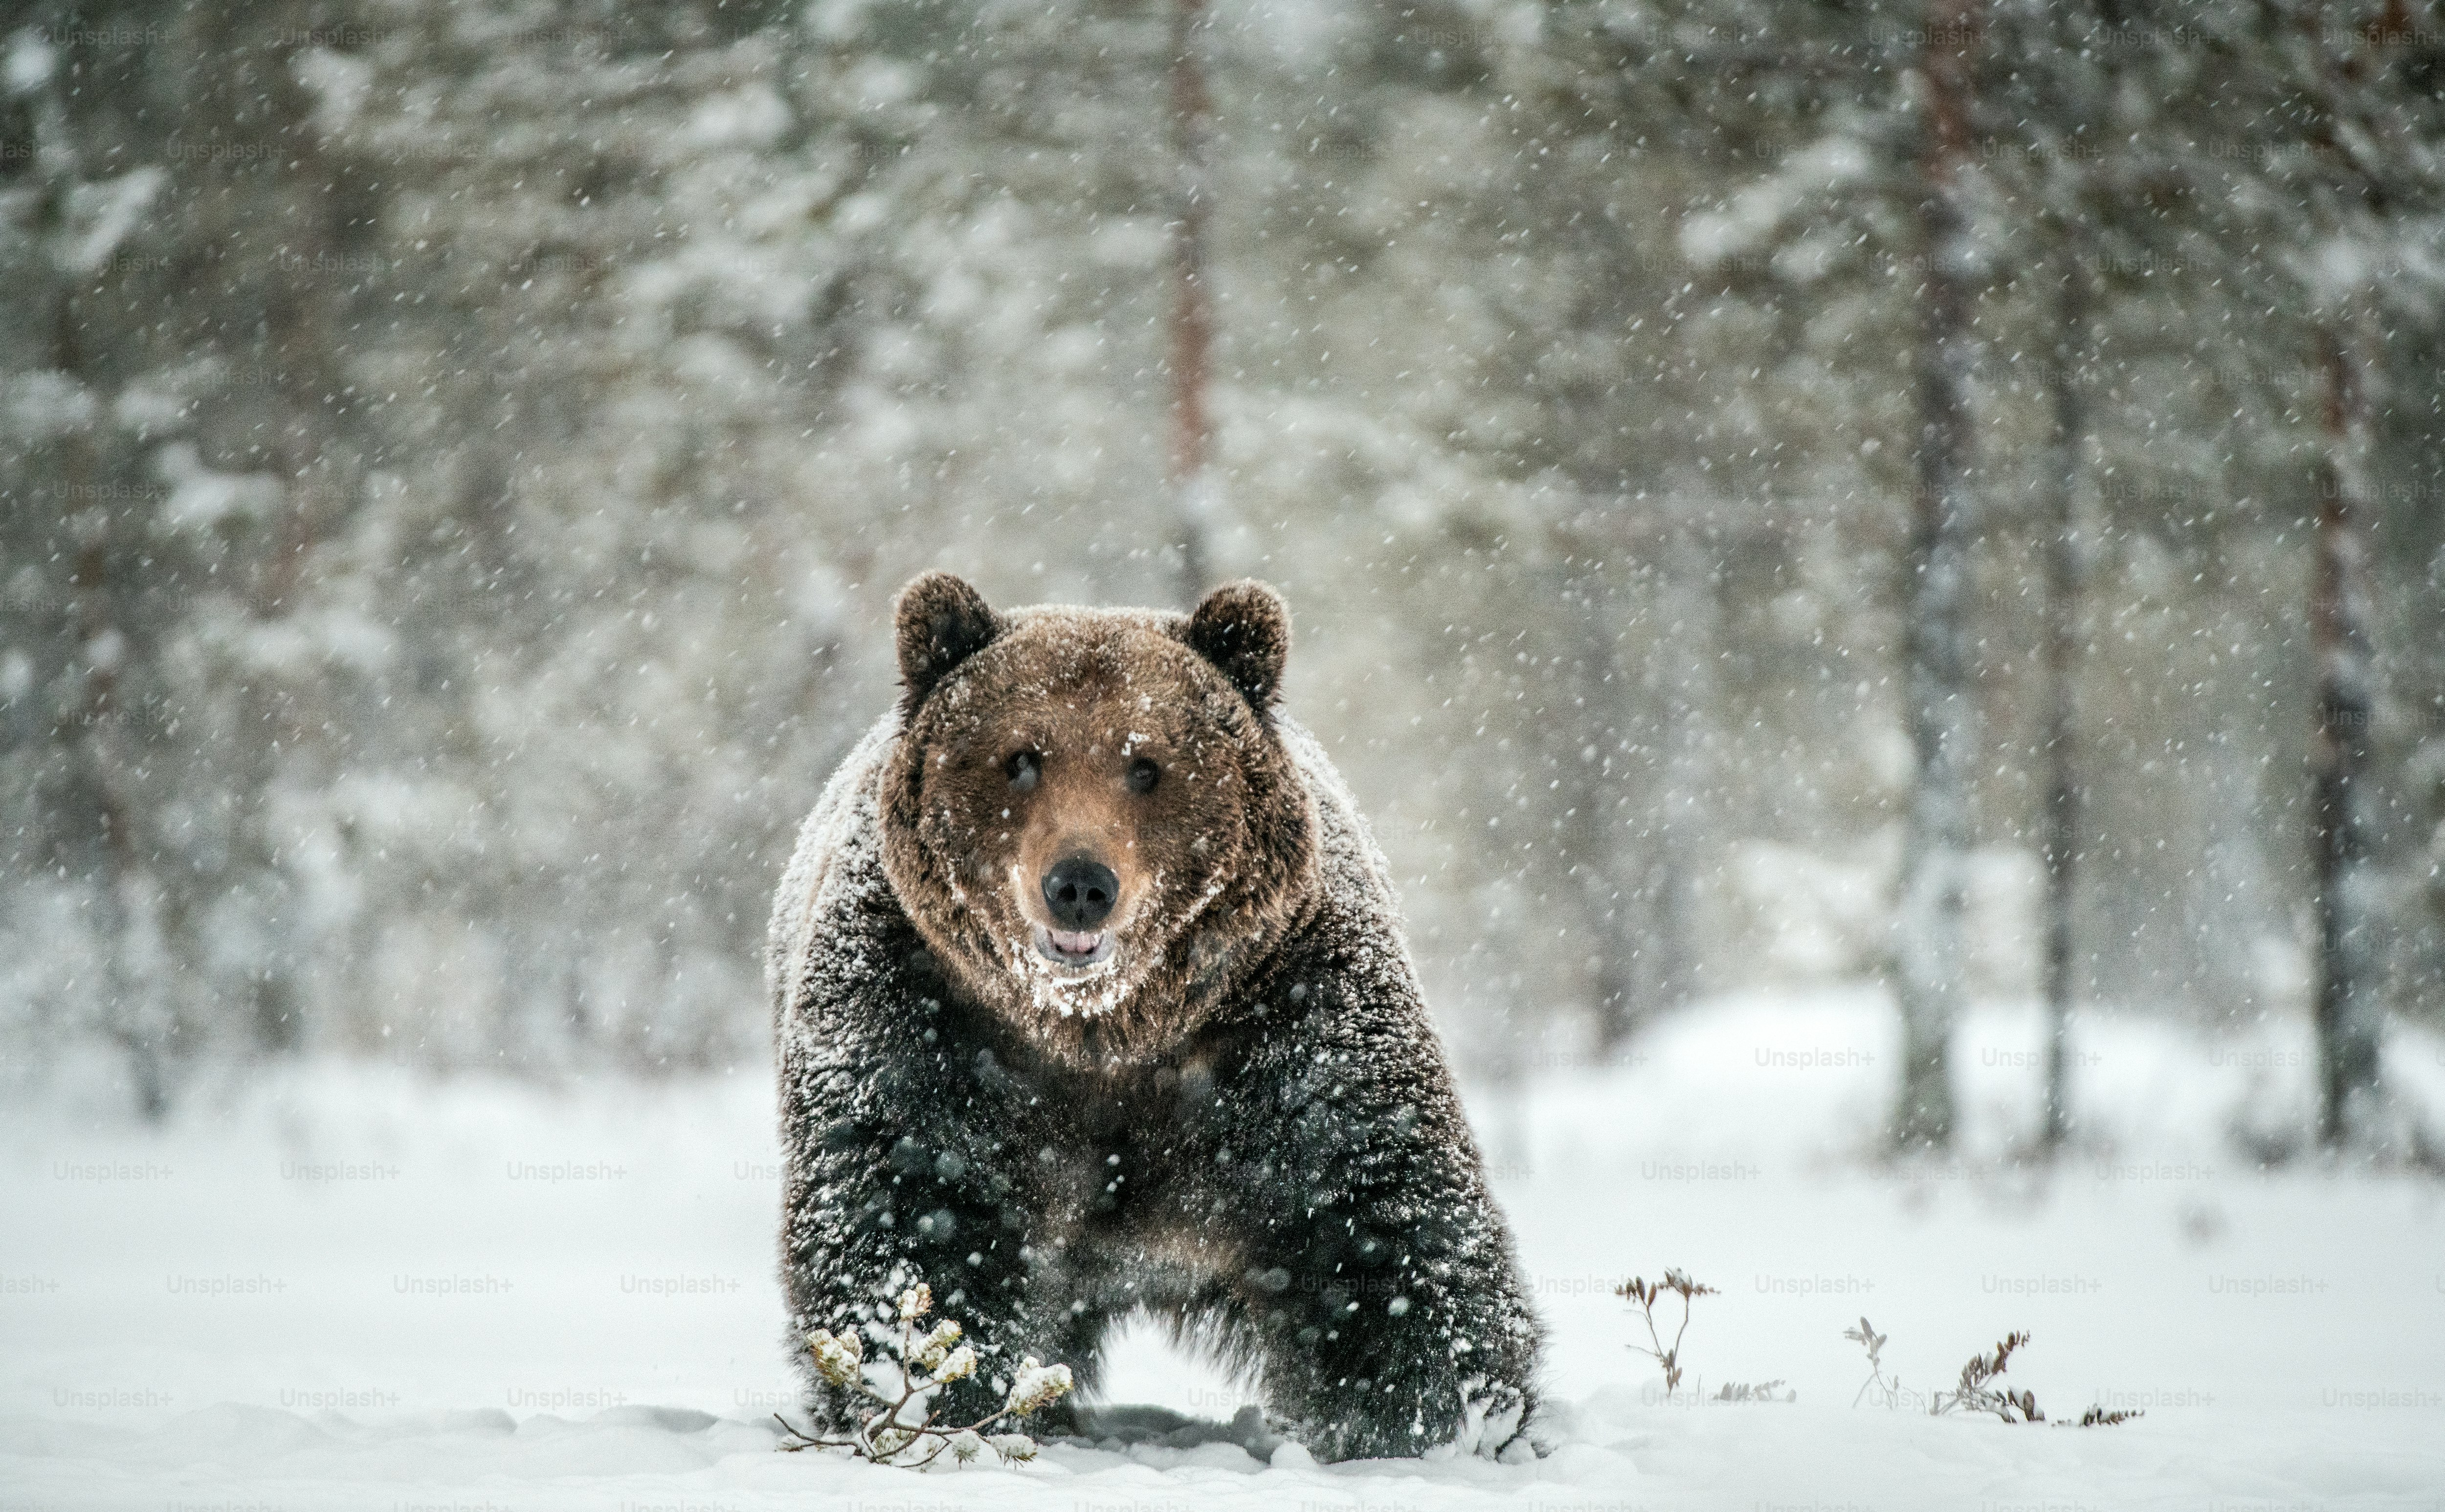 No animal is too fearsome and dangerous for passionate Unsplash photographers. Members of our professional community have delved into the northern woods and forests and come out with over 500 astounding high-resolution bear pictures.